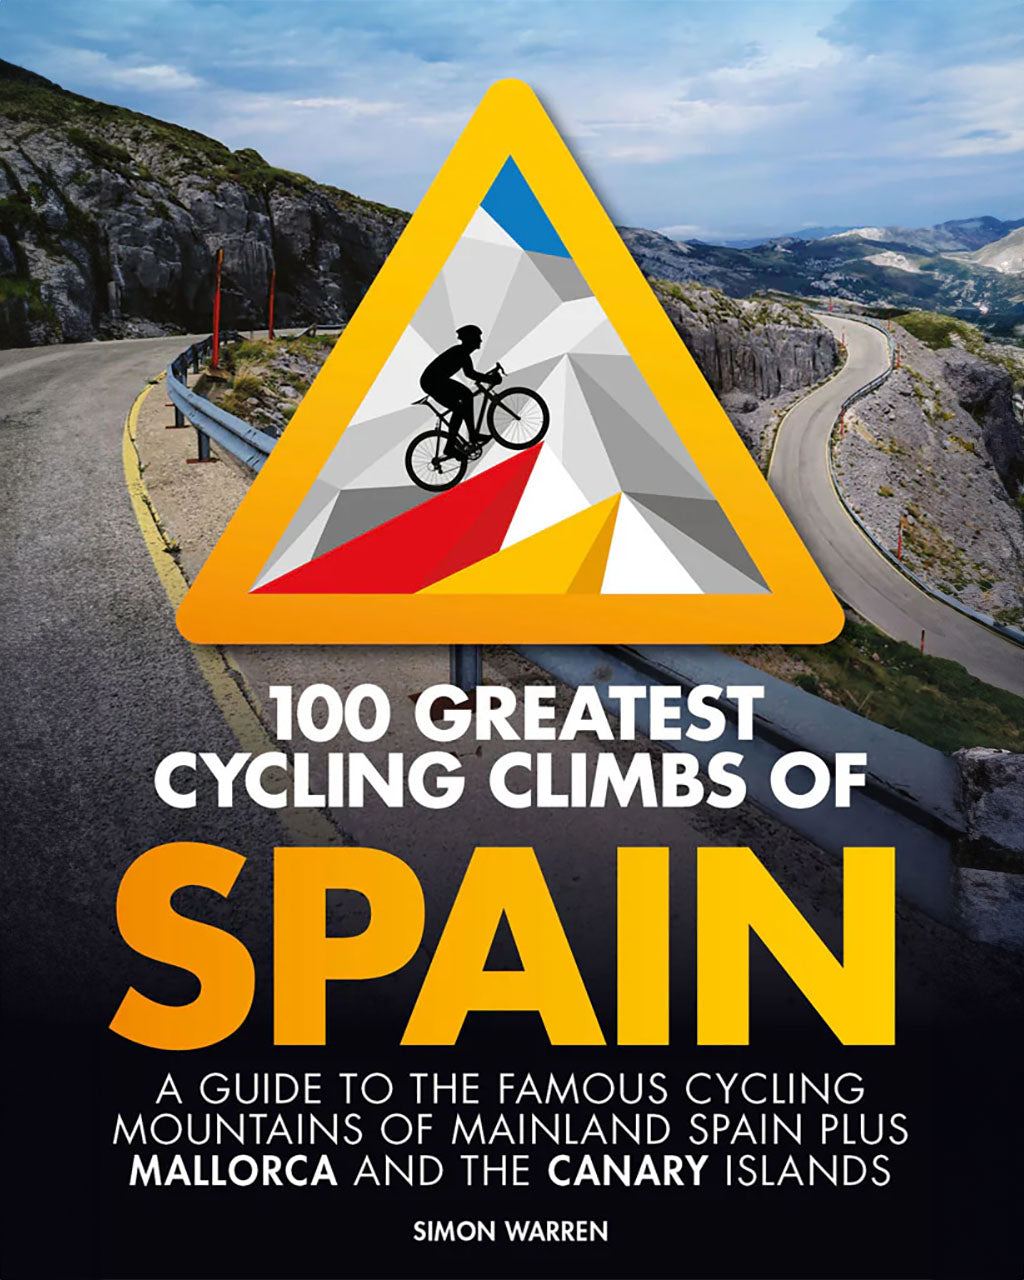 1001 Greatest Cycling Climbs of Spain by Simon Warren